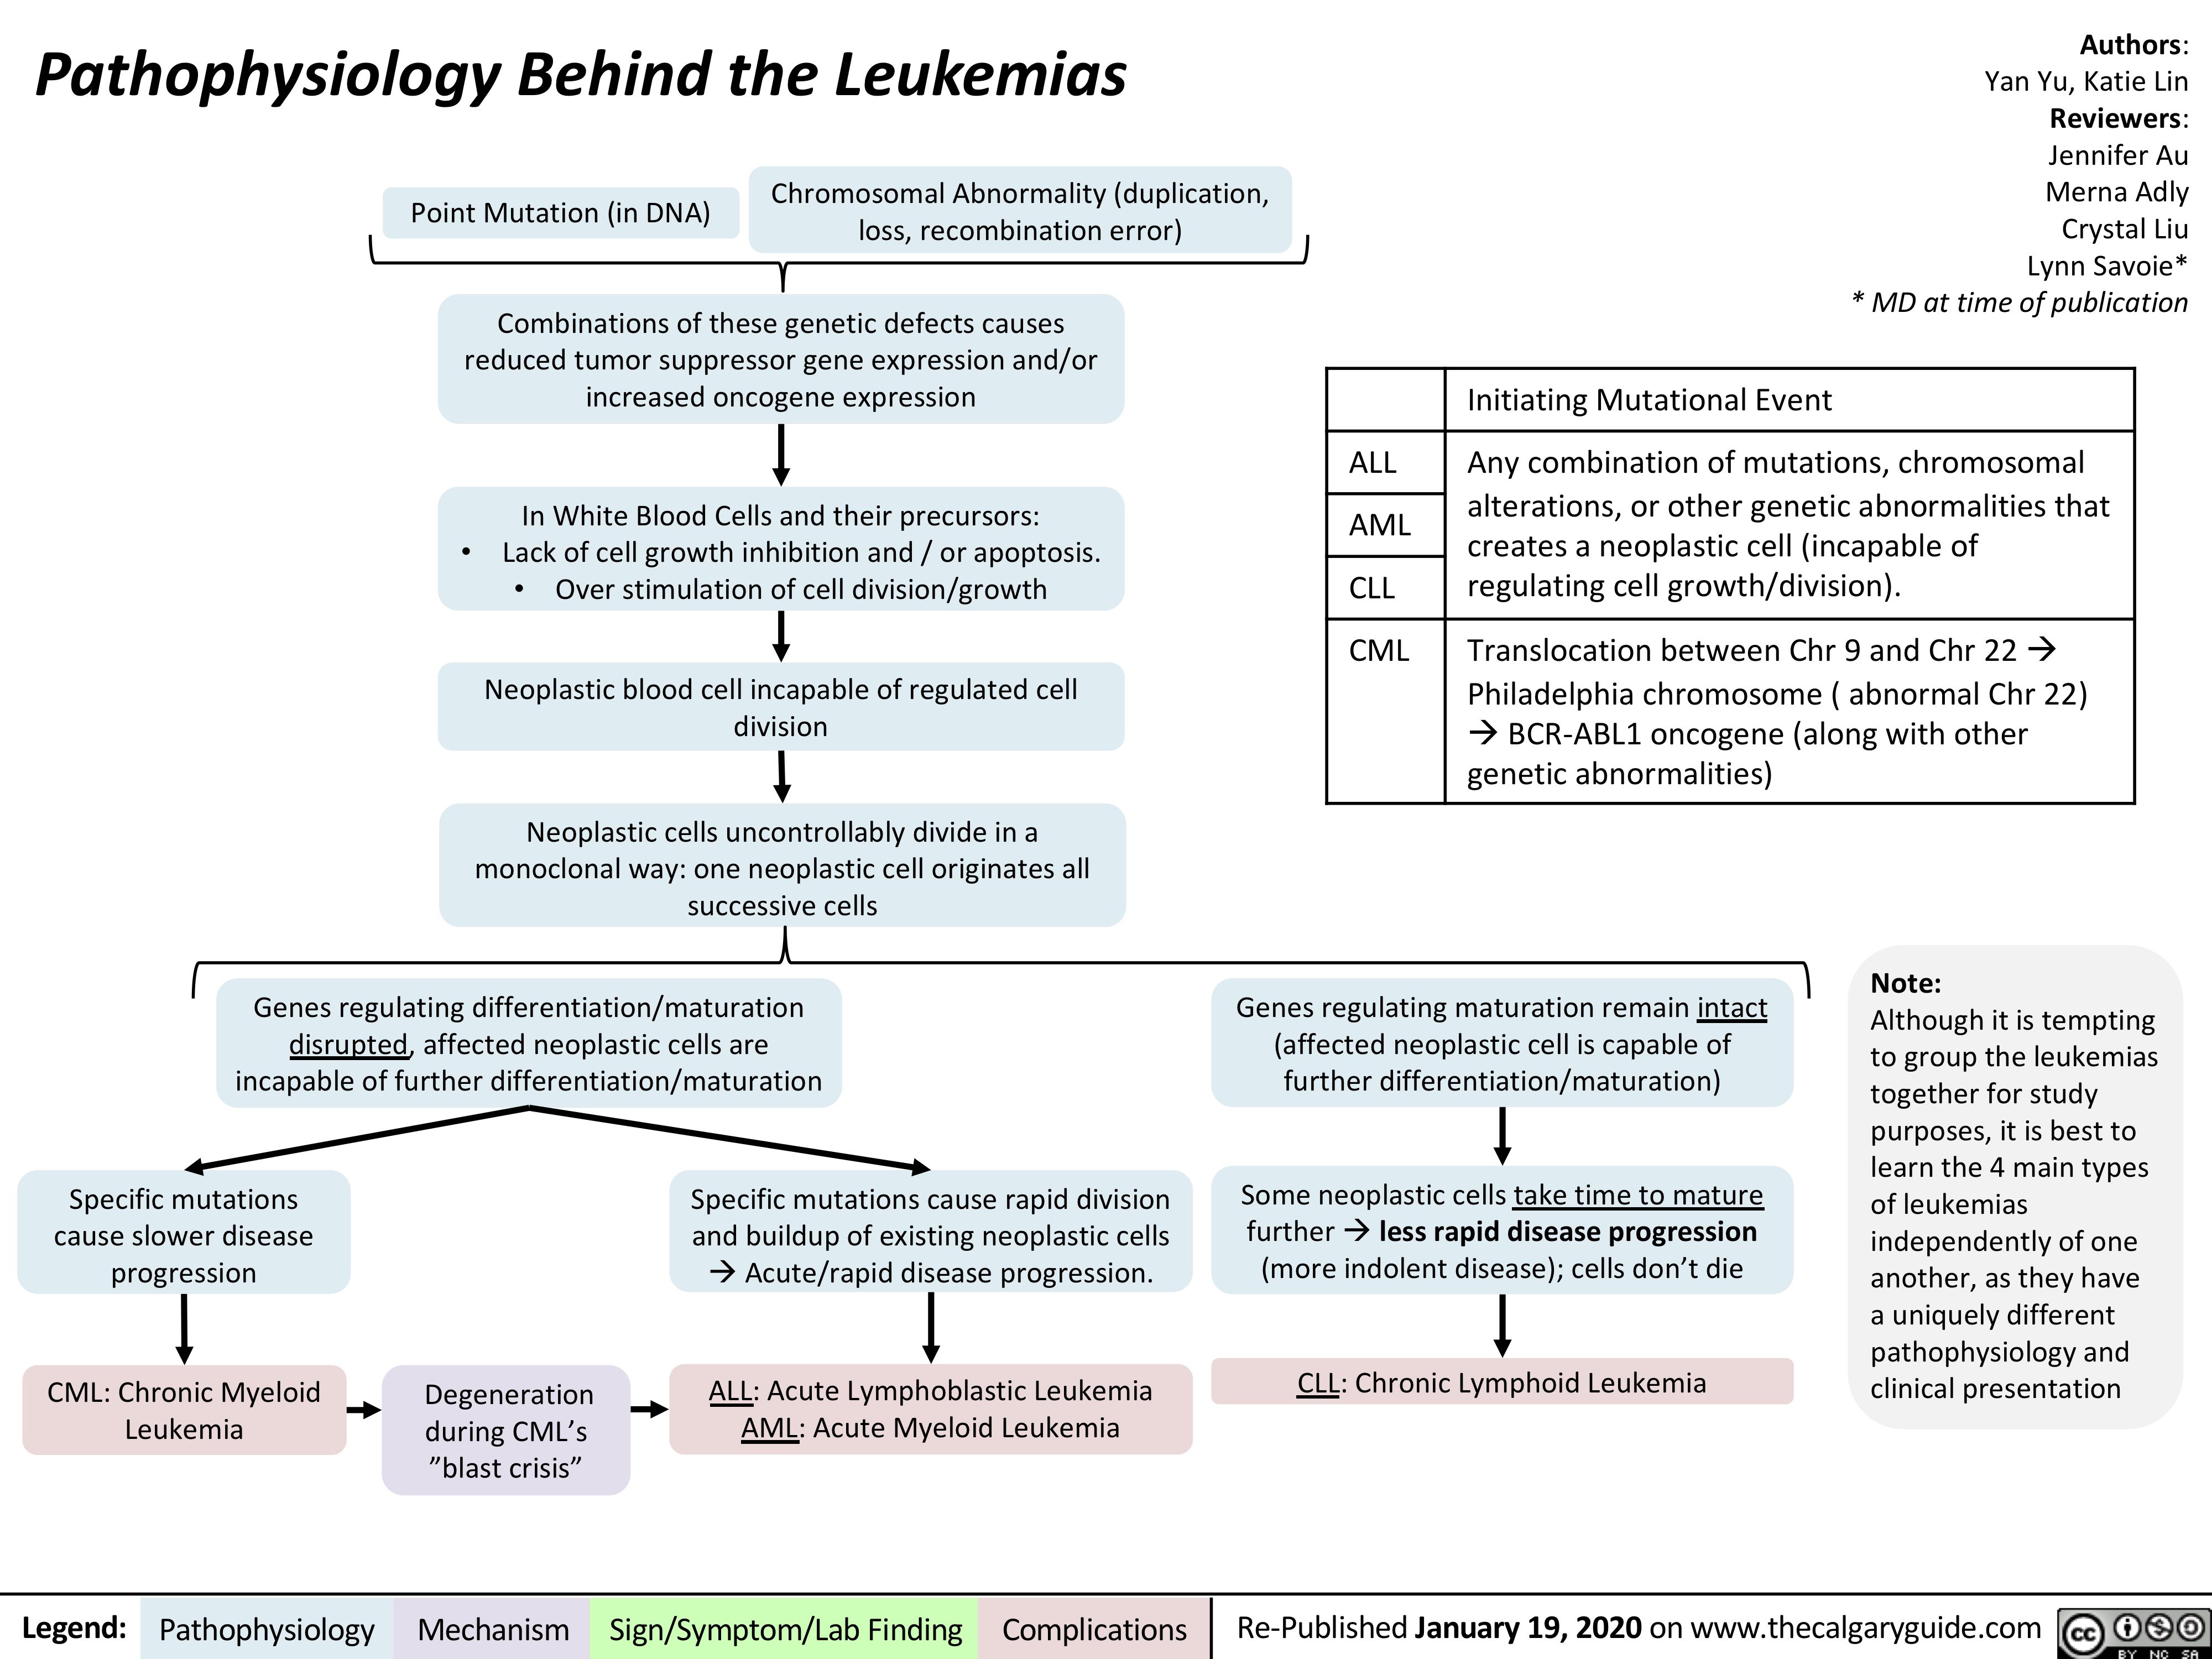 Pathophysiology Behind the Leukemias
Authors: Yan Yu, Katie Lin Reviewers: Jennifer Au Merna Adly Crystal Liu Lynn Savoie* * MD at time of publication
  Point Mutation (in DNA)
Chromosomal Abnormality (duplication, loss, recombination error)
  Combinations of these genetic defects causes reduced tumor suppressor gene expression and/or increased oncogene expression
    Initiating Mutational Event
ALL
Any combination of mutations, chromosomal
alterations, or other genetic abnormalities that creates a neoplastic cell (incapable of regulating cell growth/division).
 AML
 CLL
CML
Translocation between Chr 9 and Chr 22à Philadelphia chromosome ( abnormal Chr 22)
àBCR-ABL1 oncogene (along with other genetic abnormalities)
   •
In White Blood Cells and their precursors: Lack of cell growth inhibition and / or apoptosis.
• Over stimulation of cell division/growth Neoplastic blood cell incapable of regulated cell
division
Neoplastic cells uncontrollably divide in a monoclonal way: one neoplastic cell originates all successive cells
          Genes regulating differentiation/maturation disrupted, affected neoplastic cells are incapable of further differentiation/maturation
Genes regulating maturation remain intact (affected neoplastic cell is capable of further differentiation/maturation)
Some neoplastic cells take time to mature furtheràless rapid disease progression (more indolent disease); cells don’t die
CLL: Chronic Lymphoid Leukemia
Note:
Although it is tempting to group the leukemias together for study purposes, it is best to learn the 4 main types of leukemias independently of one another, as they have a uniquely different pathophysiology and clinical presentation
        Specific mutations cause slower disease progression
CML: Chronic Myeloid Leukemia
Degeneration during CML’s ”blast crisis”
Specific mutations cause rapid division and buildup of existing neoplastic cells àAcute/rapid disease progression.
ALL: Acute Lymphoblastic Leukemia AML: Acute Myeloid Leukemia
              Legend:
 Pathophysiology
Mechanism
Sign/Symptom/Lab Finding
  Complications
Re-Published January 19, 2020 on www.thecalgaryguide.com
    